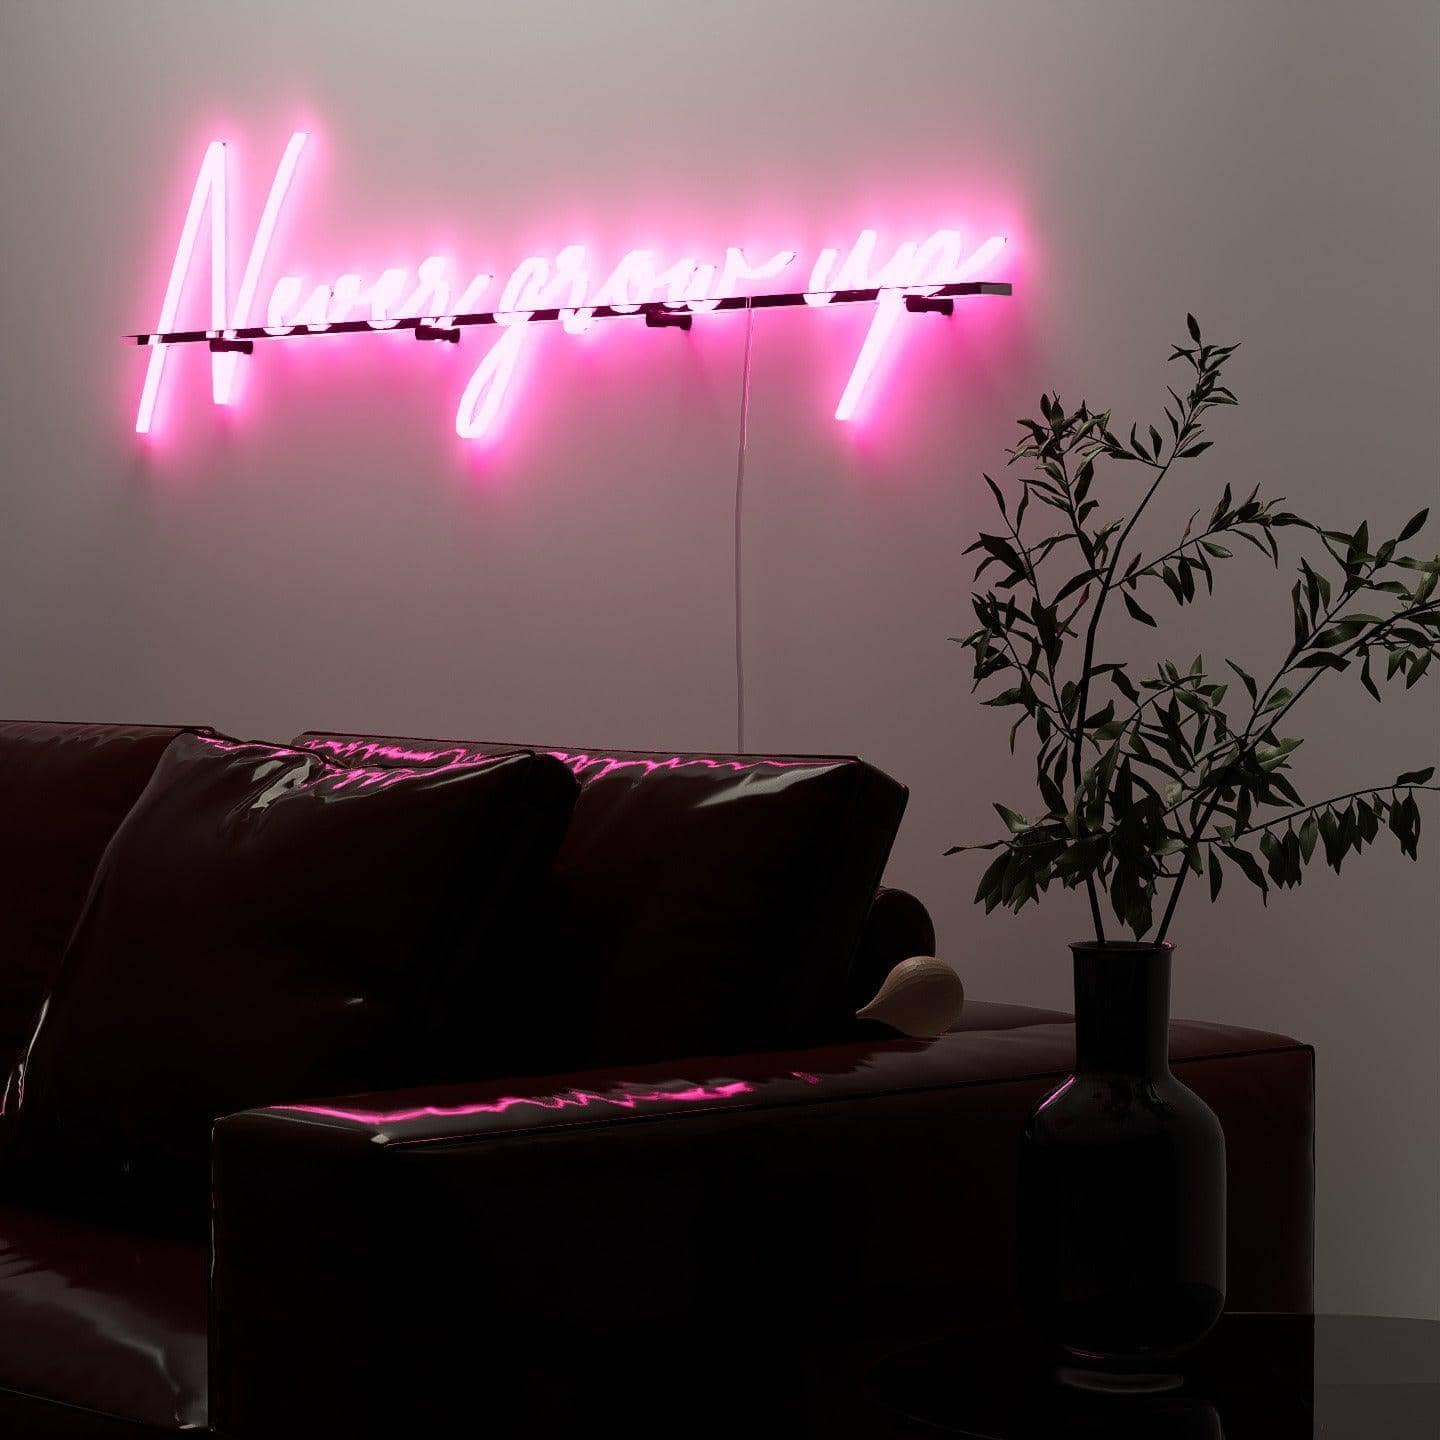 dark-night-lit-pink-neon-lights-hanging-on-the-wall-for-display-never-grow-up